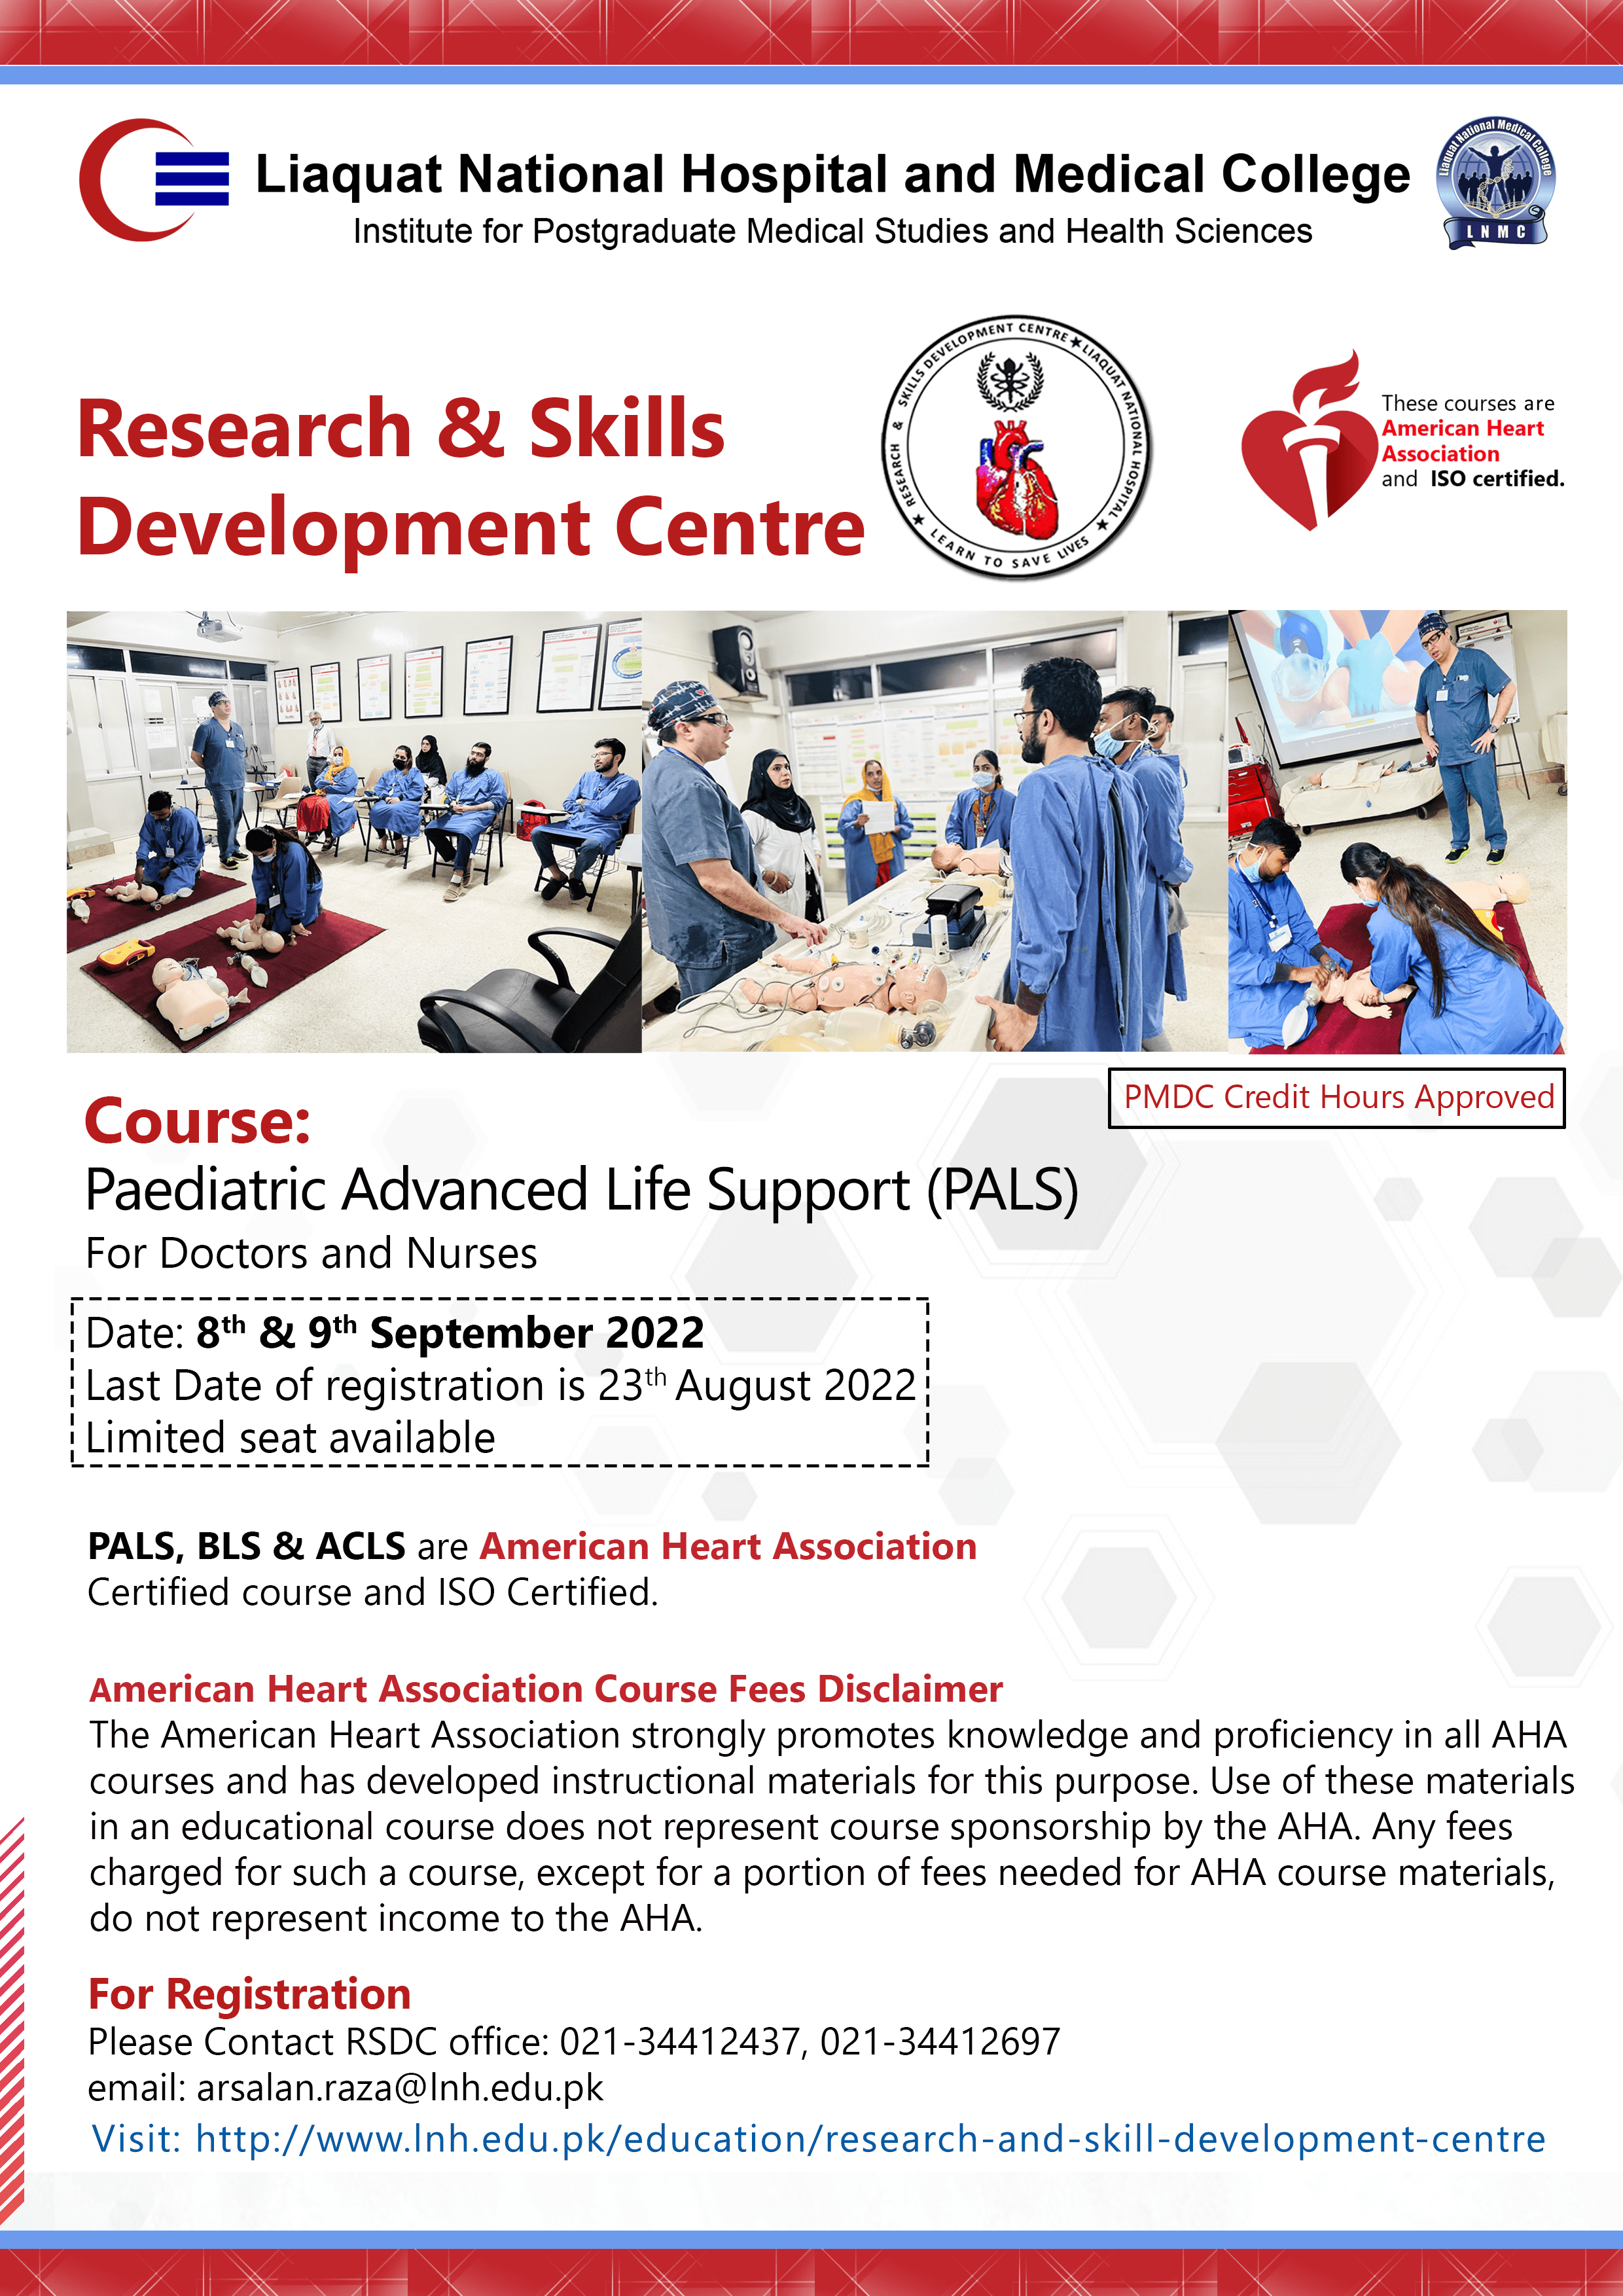 Paediatric Advanced Life Support Course, Sep 8-9, 2022